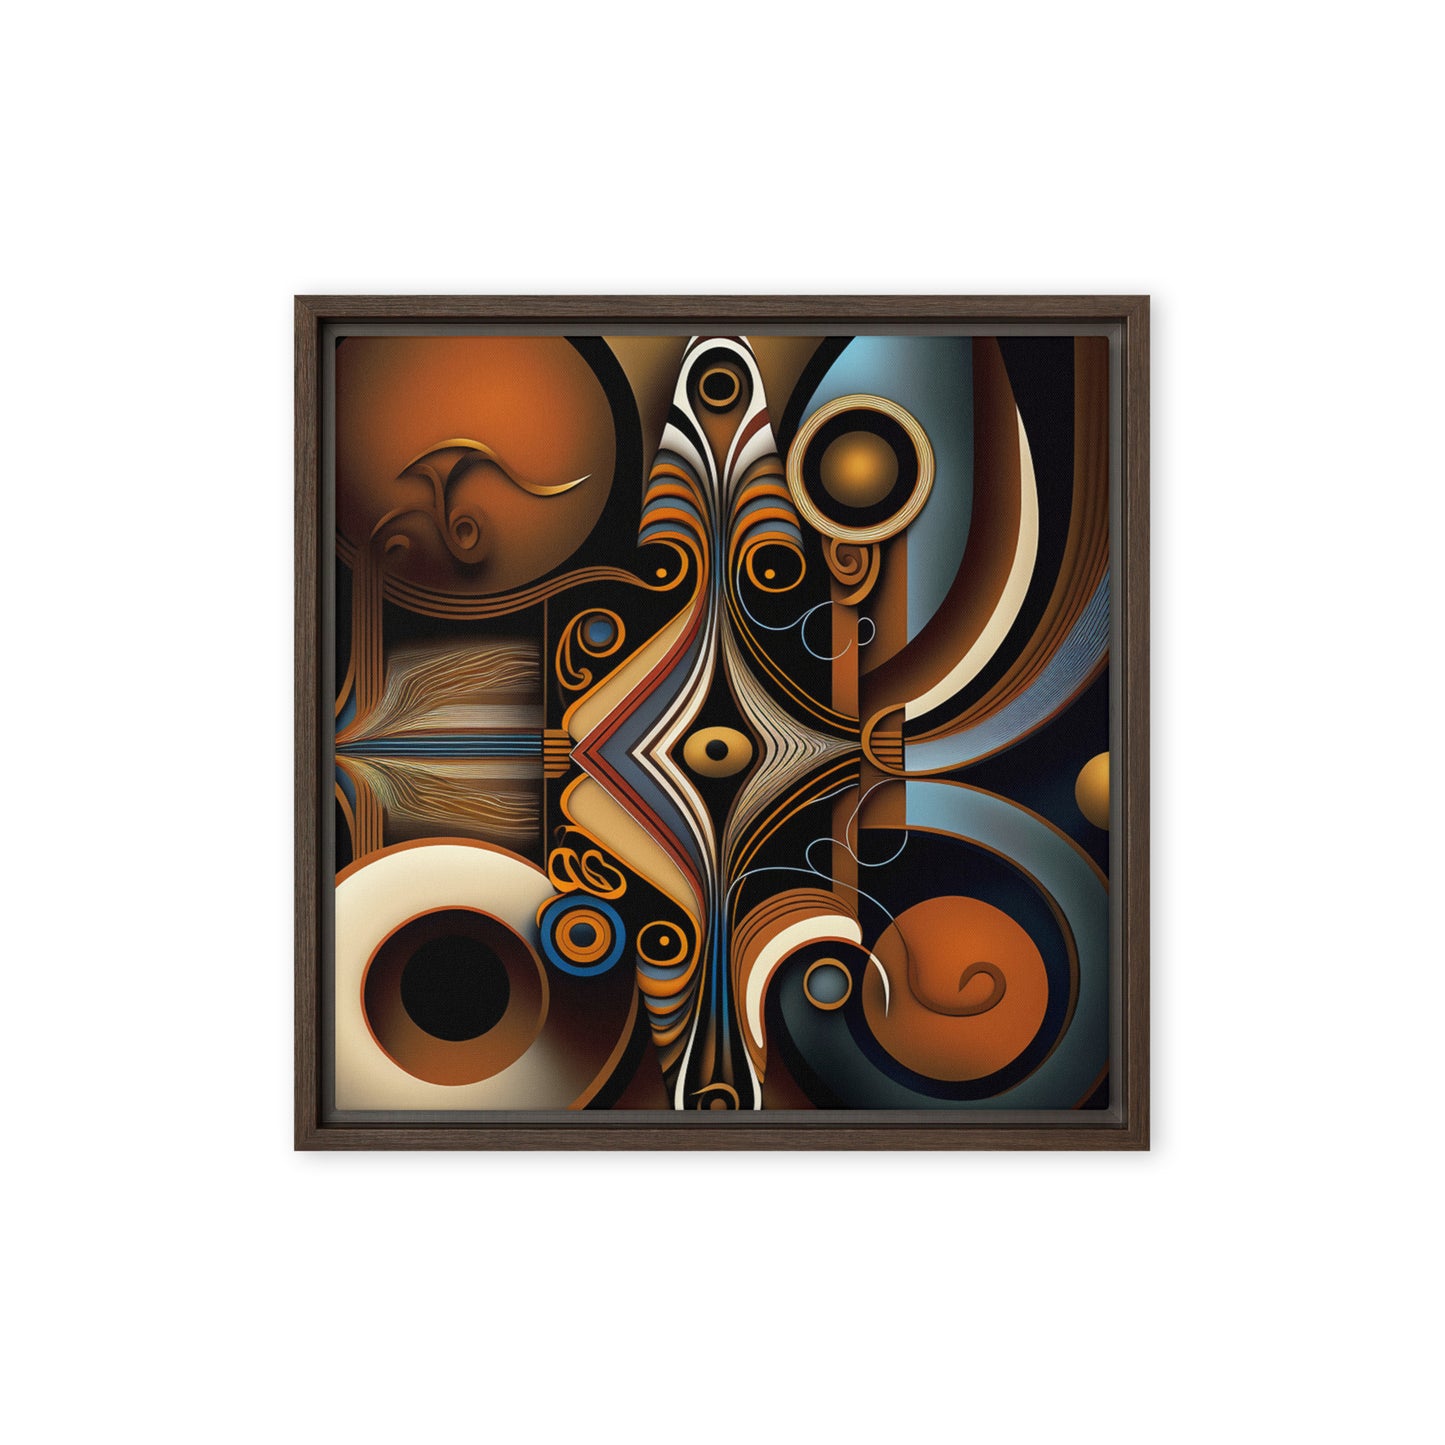 'INNOVATE' abstract African design: Framed canvas art